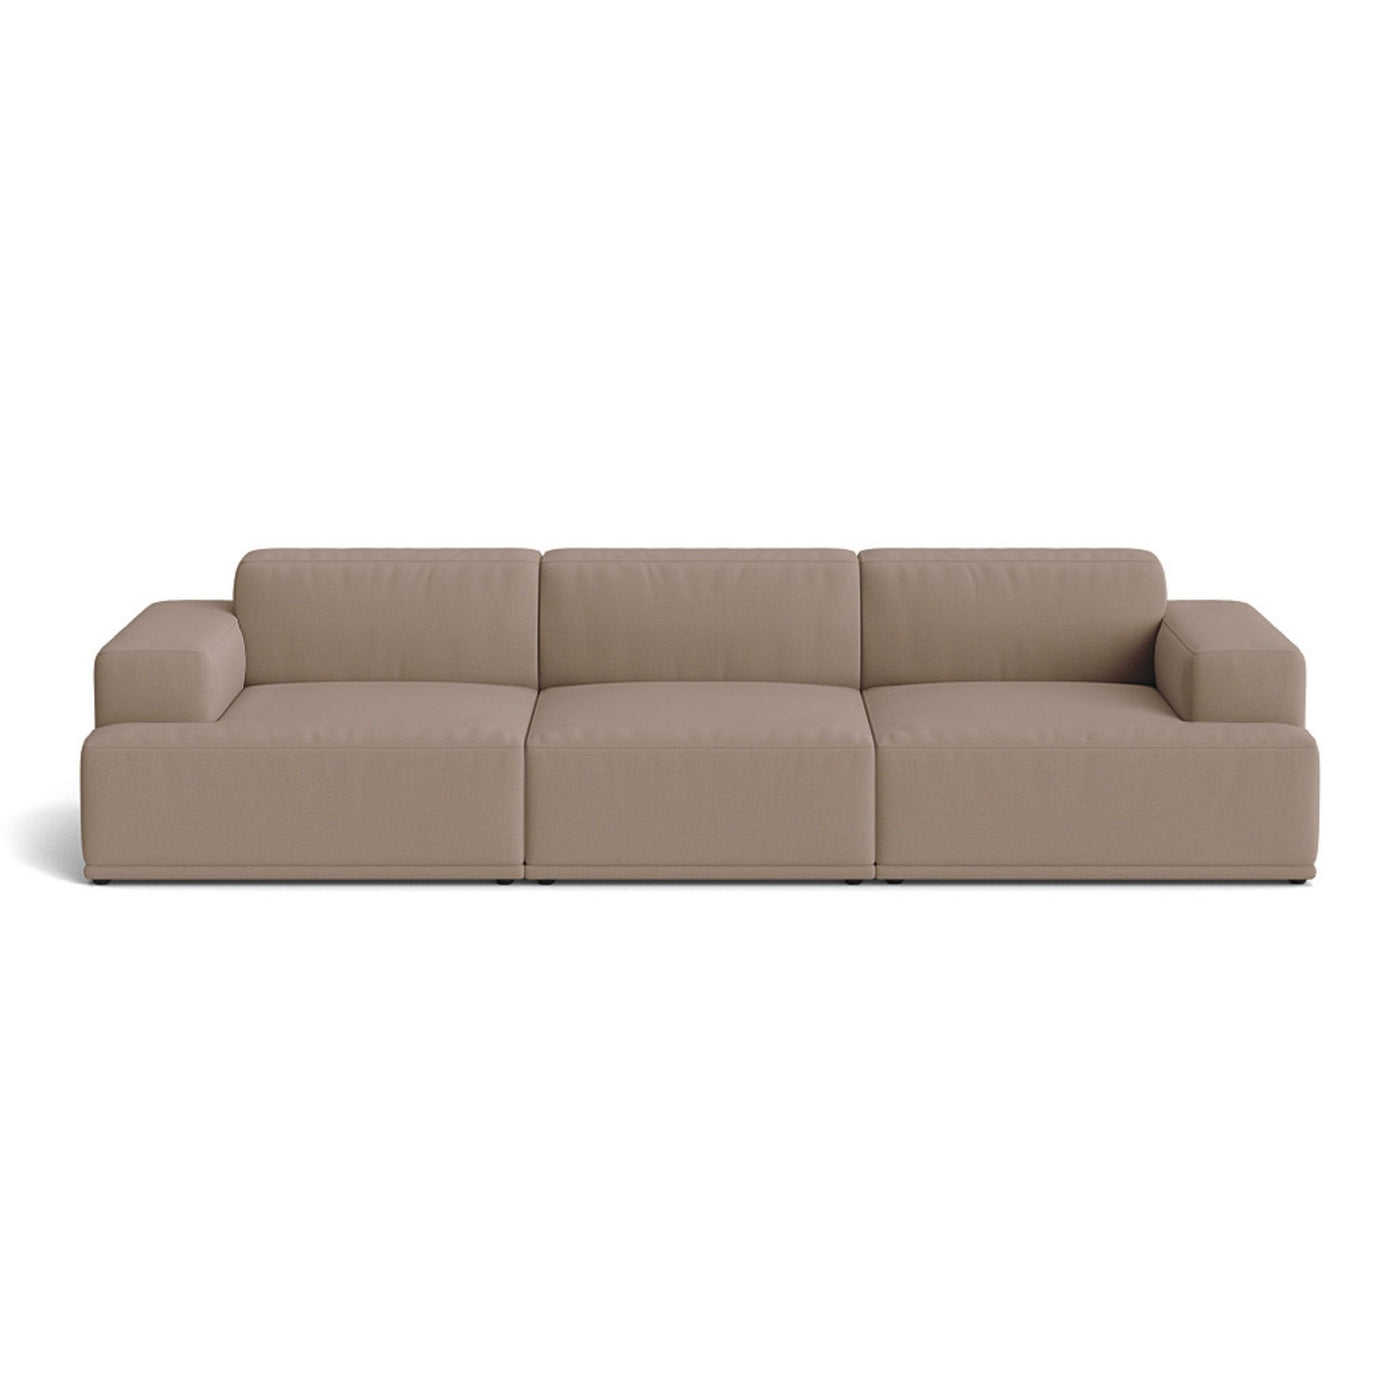 Muuto Connect Soft Modular 3 Seater Sofa, configuration 1. Made-to-order from someday designs. #colour_steelcut-trio-426